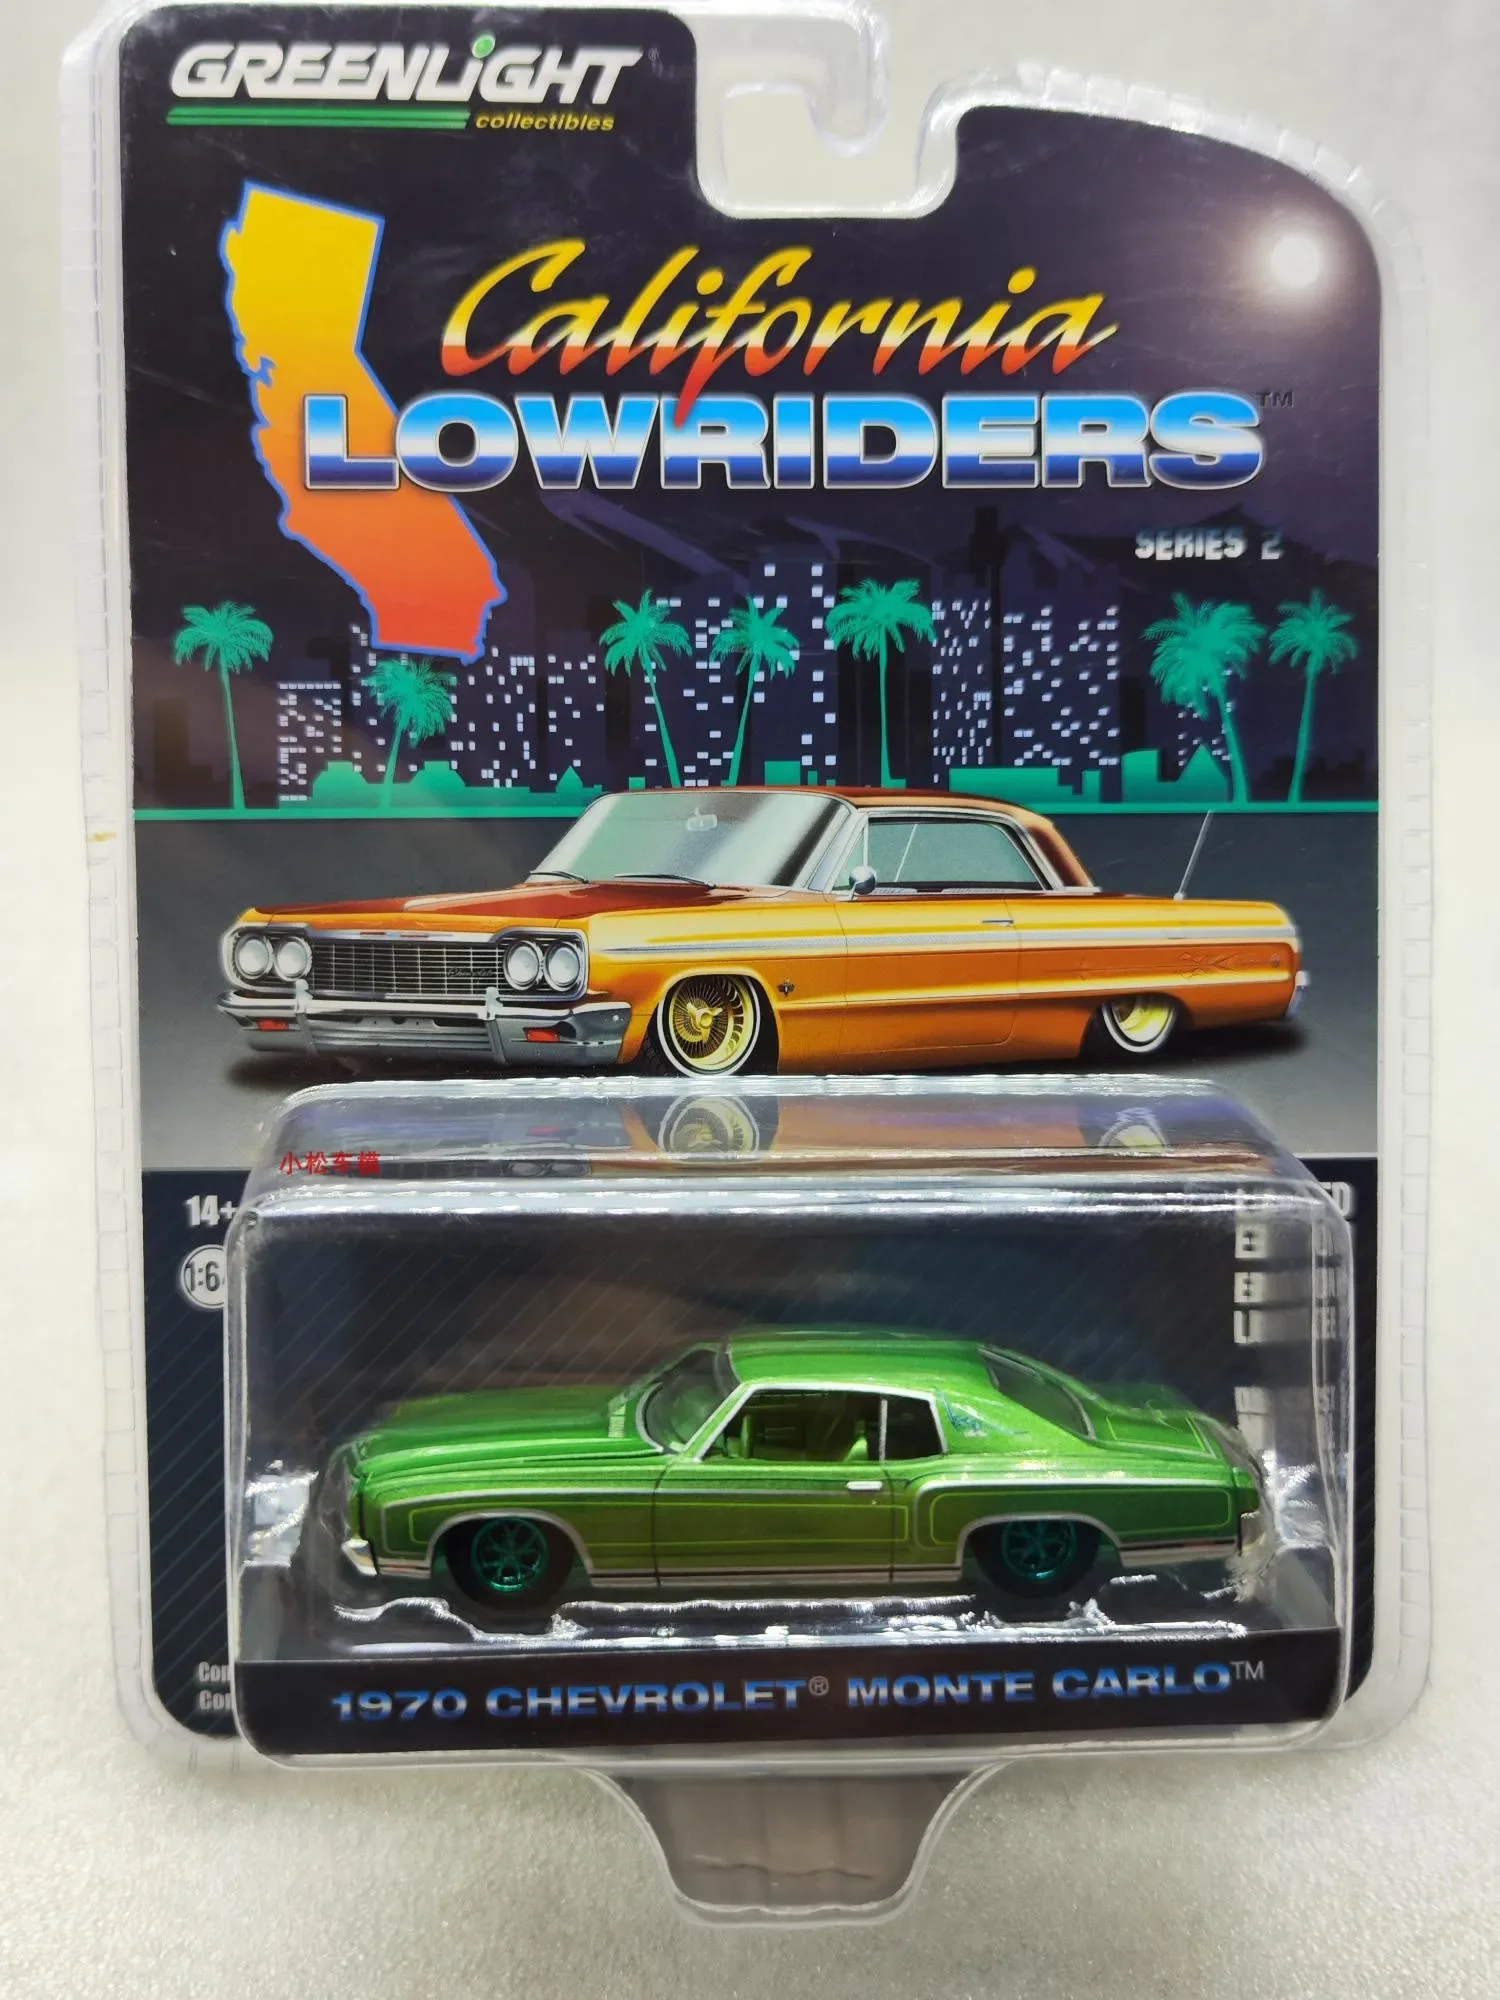 

1: 64 California Low lying Series 2-1970 Chevrolet Monte Carlo - Green Machine Collection of car models